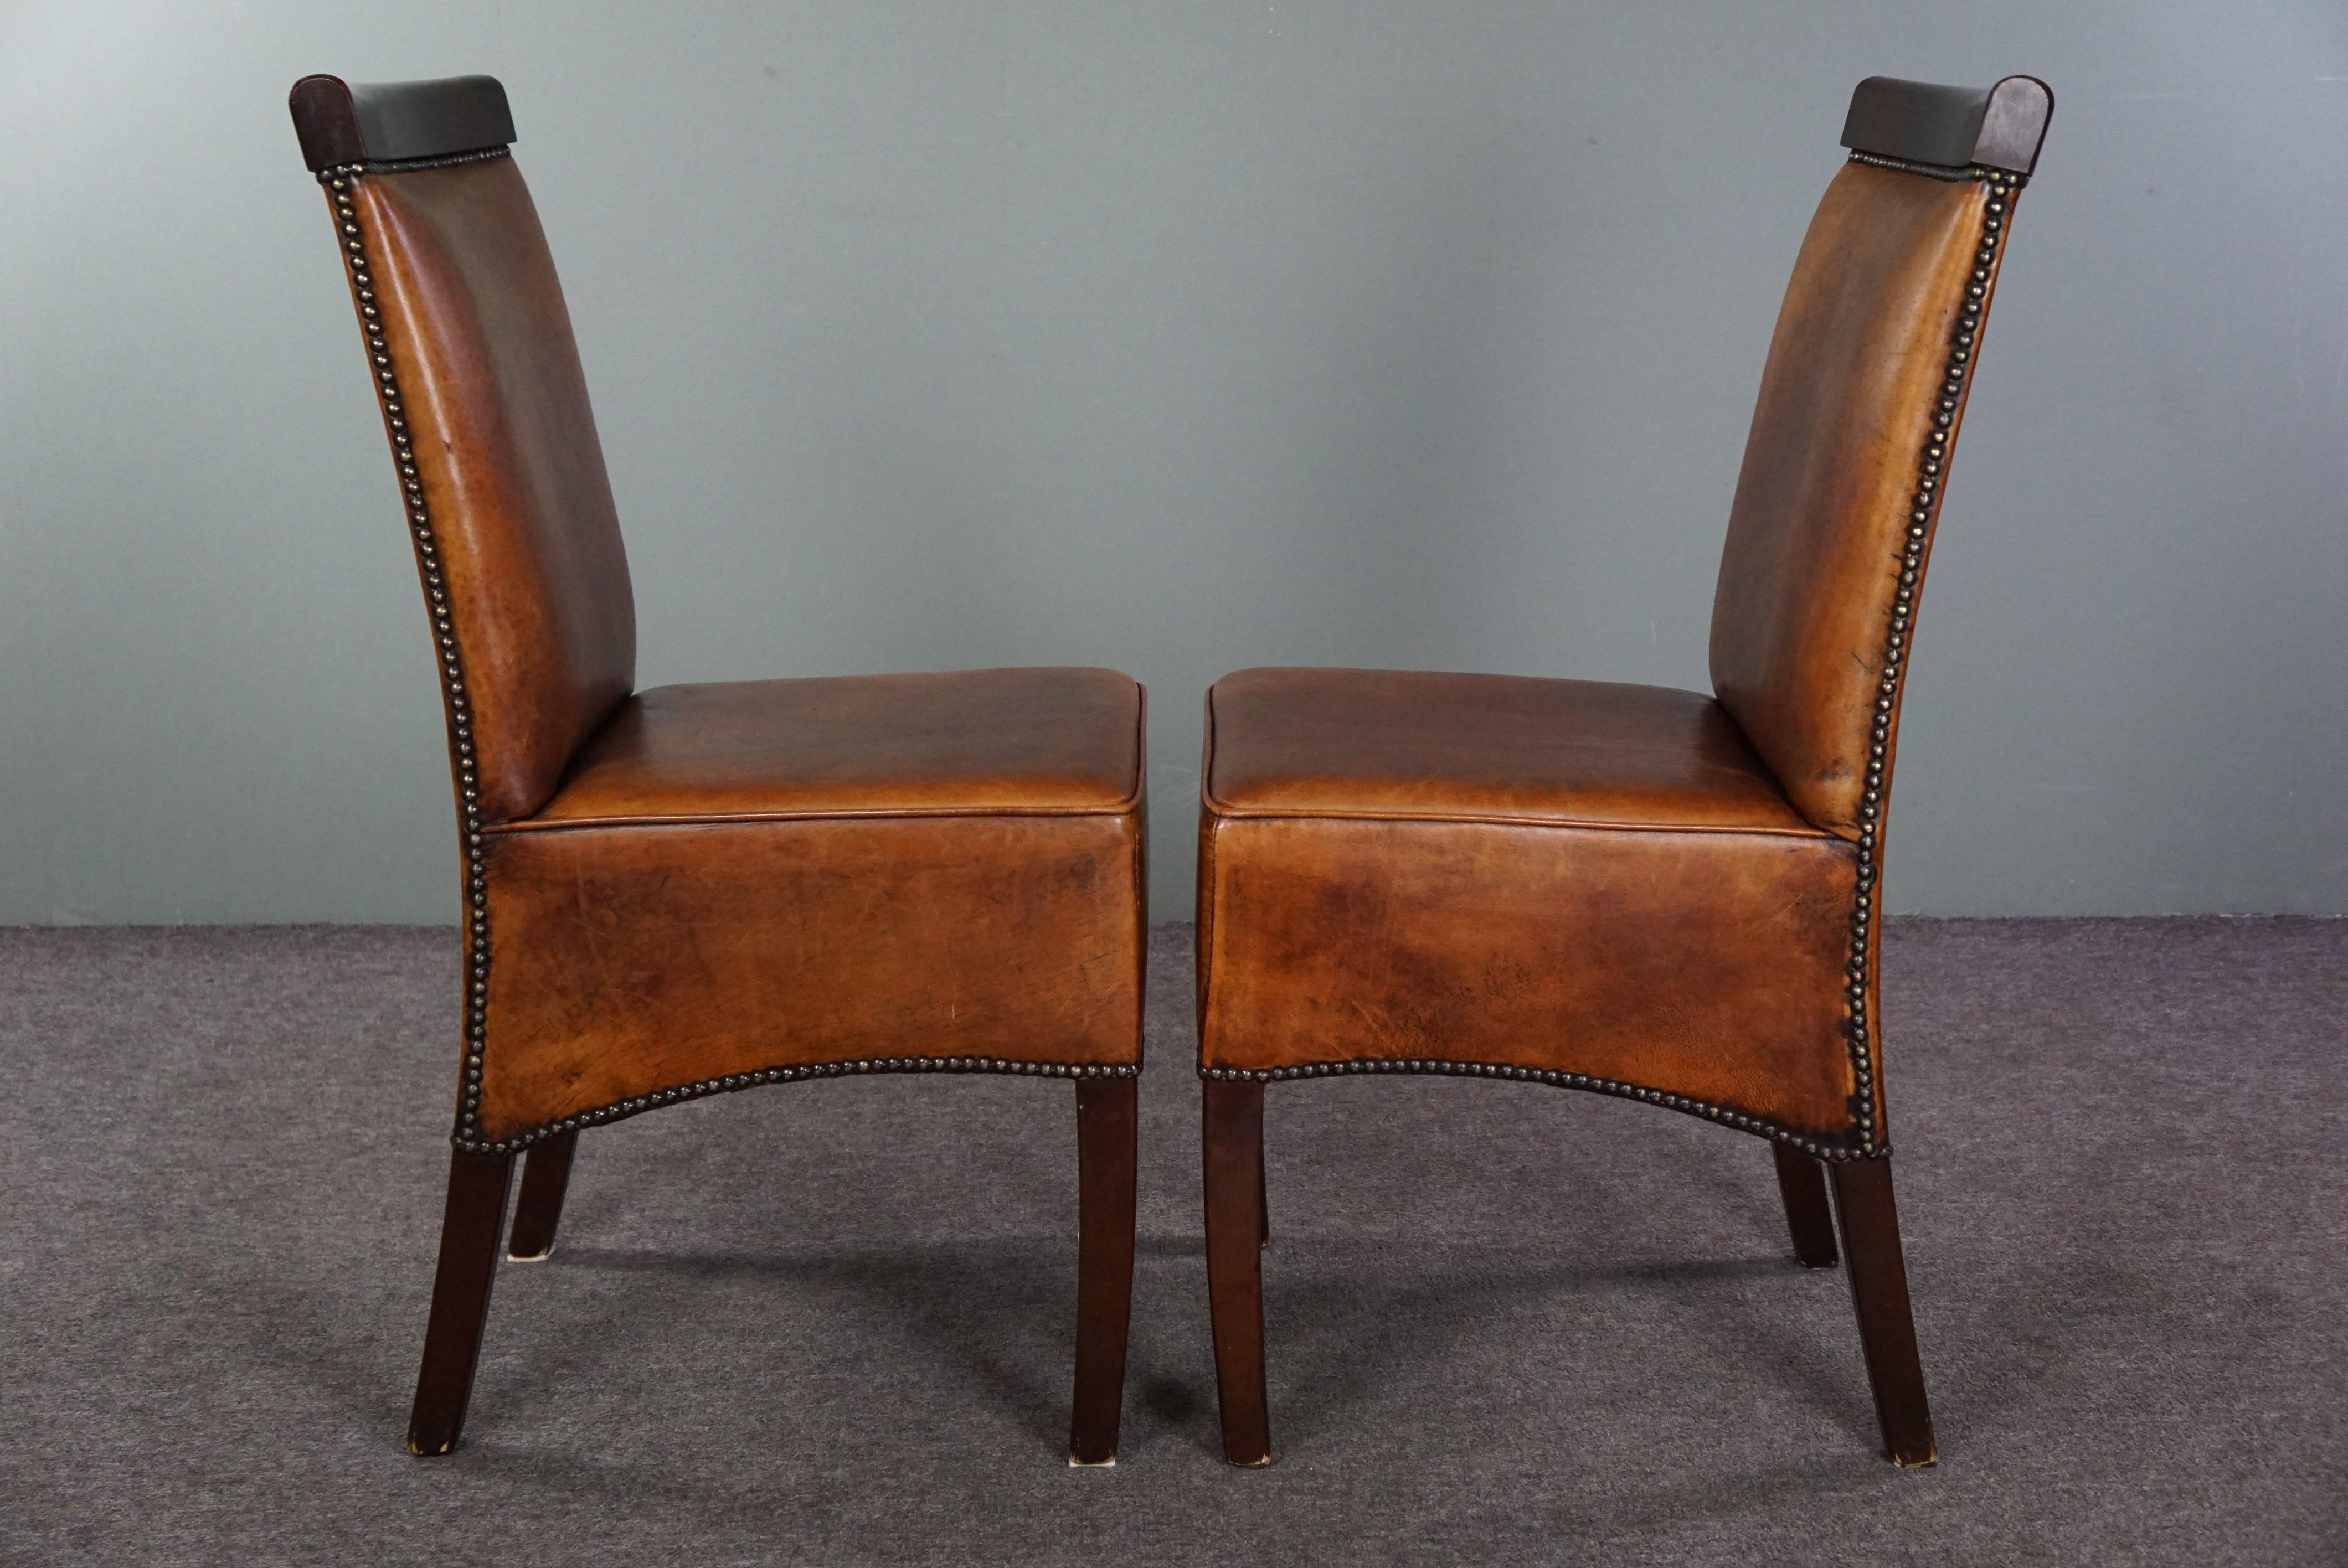 Offered is this set of four sheep leather Art Deco dining chairs. This beautiful set of four sheep leather dining chairs in Art Deco style offers more than just comfortable seating. Art Deco reflects an era of elegance and sophistication. These